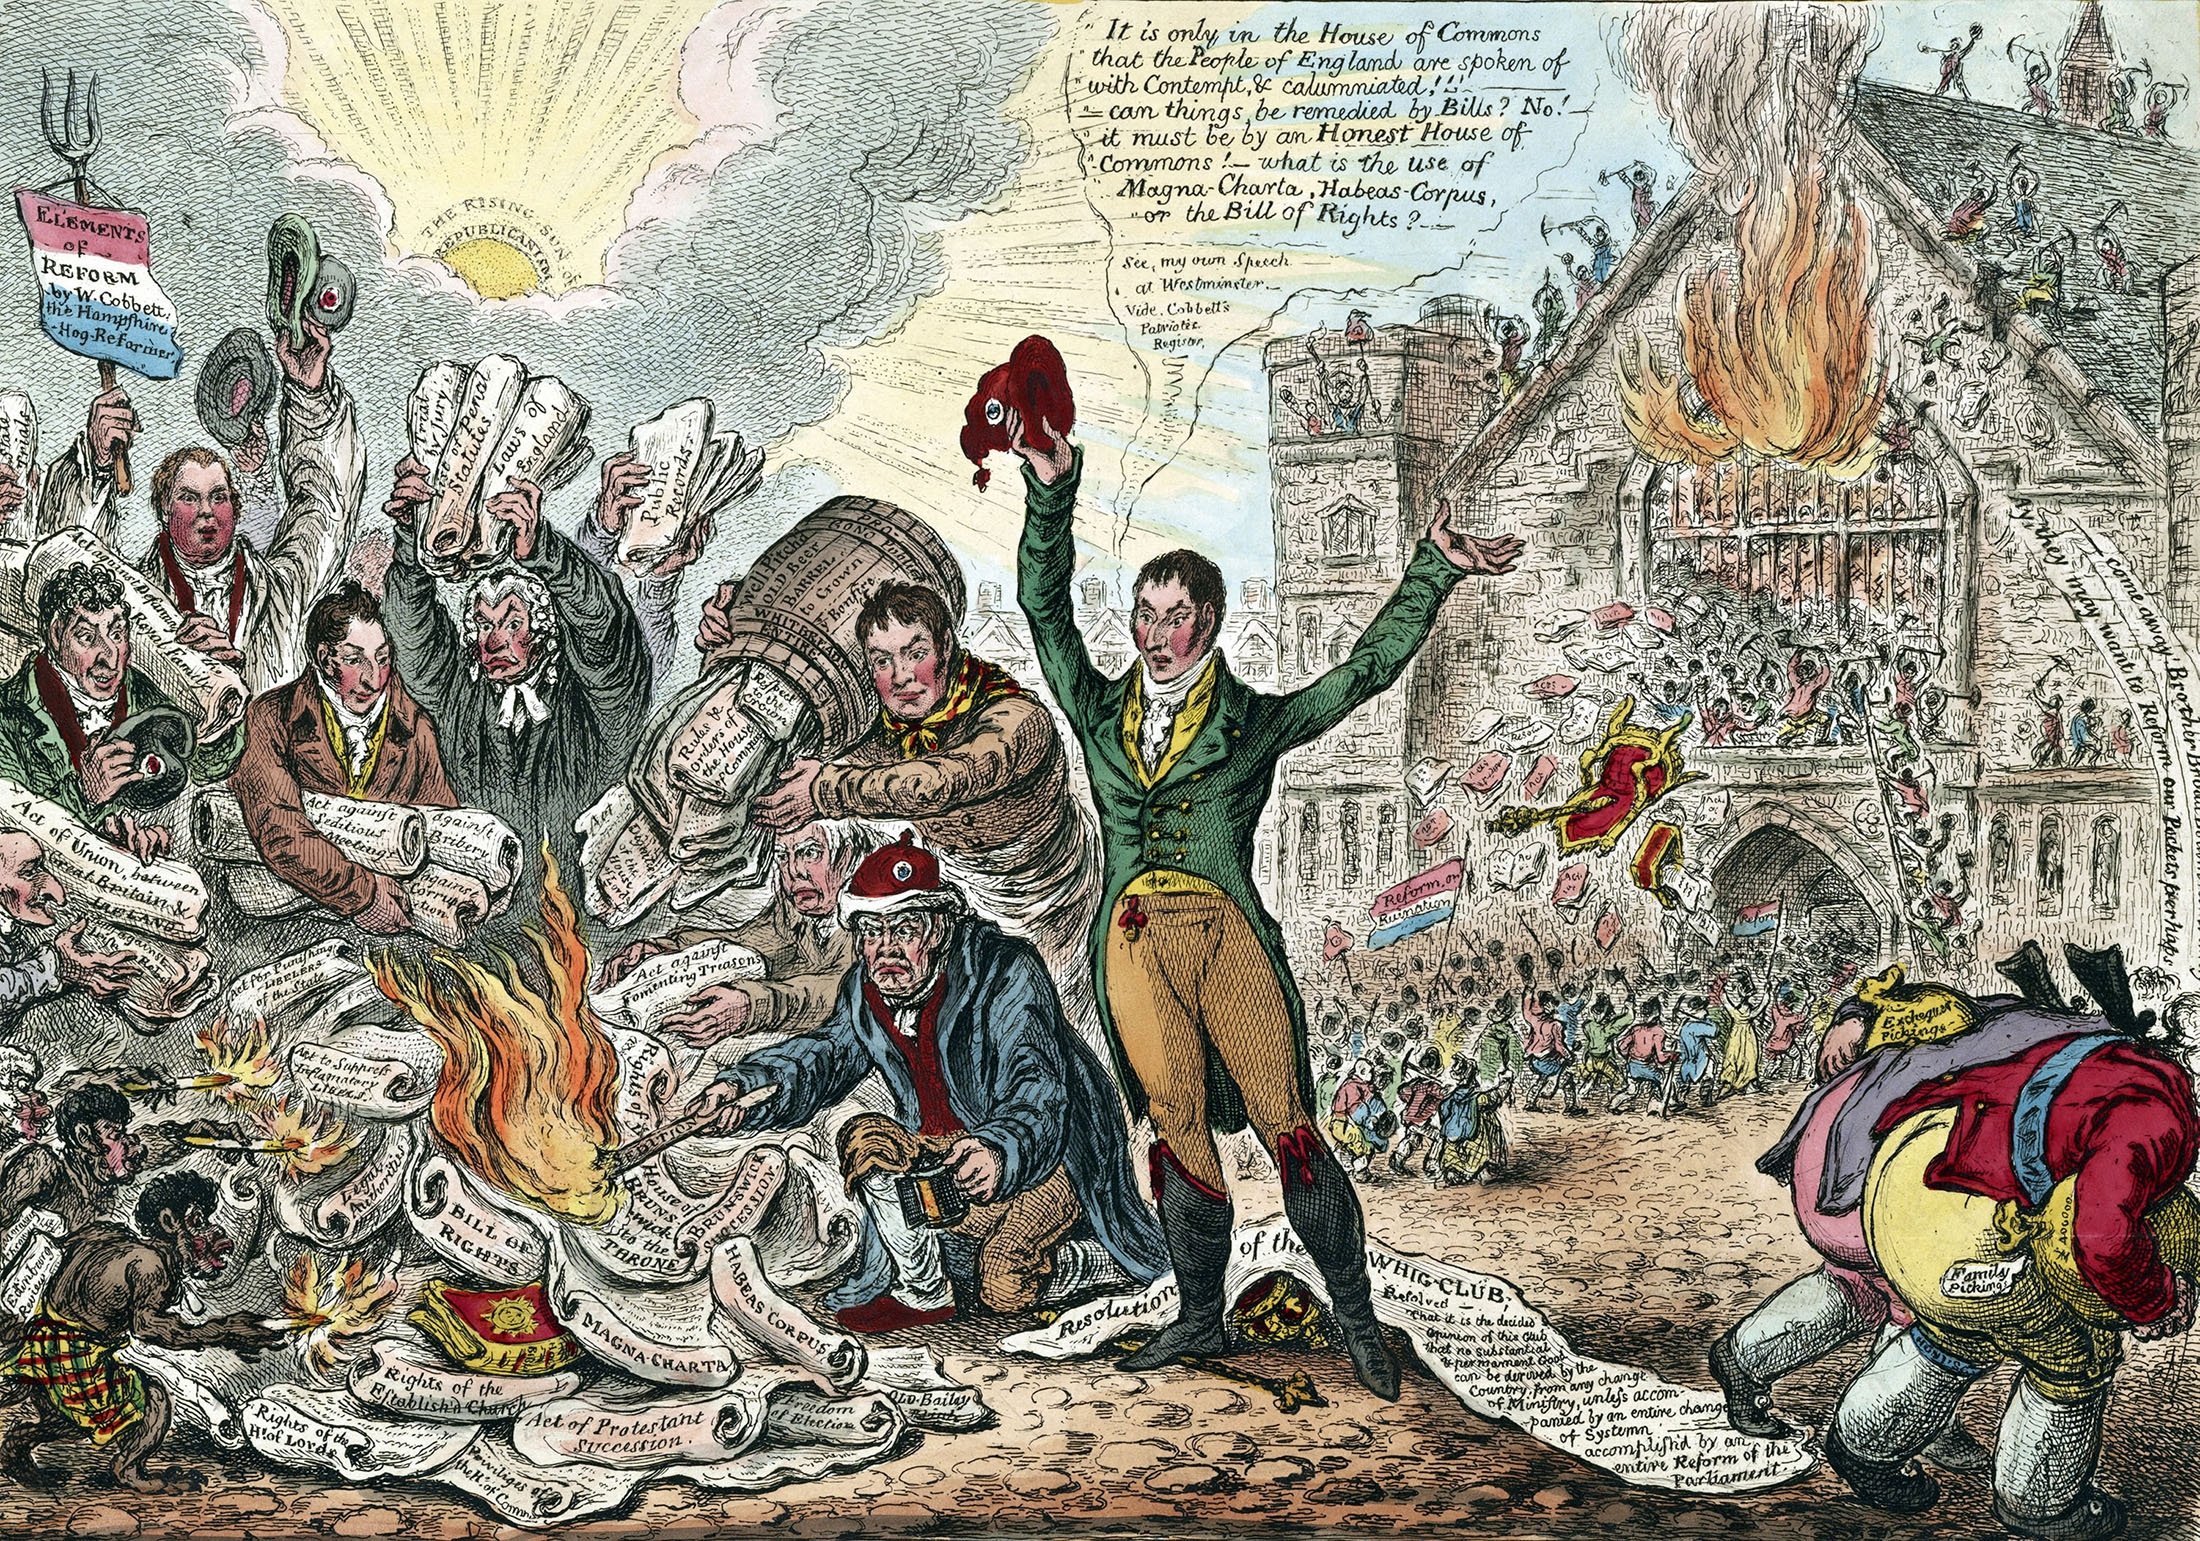 English politician Sir Francis Burdett makes a speech while waving a bonnet rouge (red cap) as patriots light a revolutionary bonfire while a mob destroys Parliament in the background, 1809. (Getty Images)